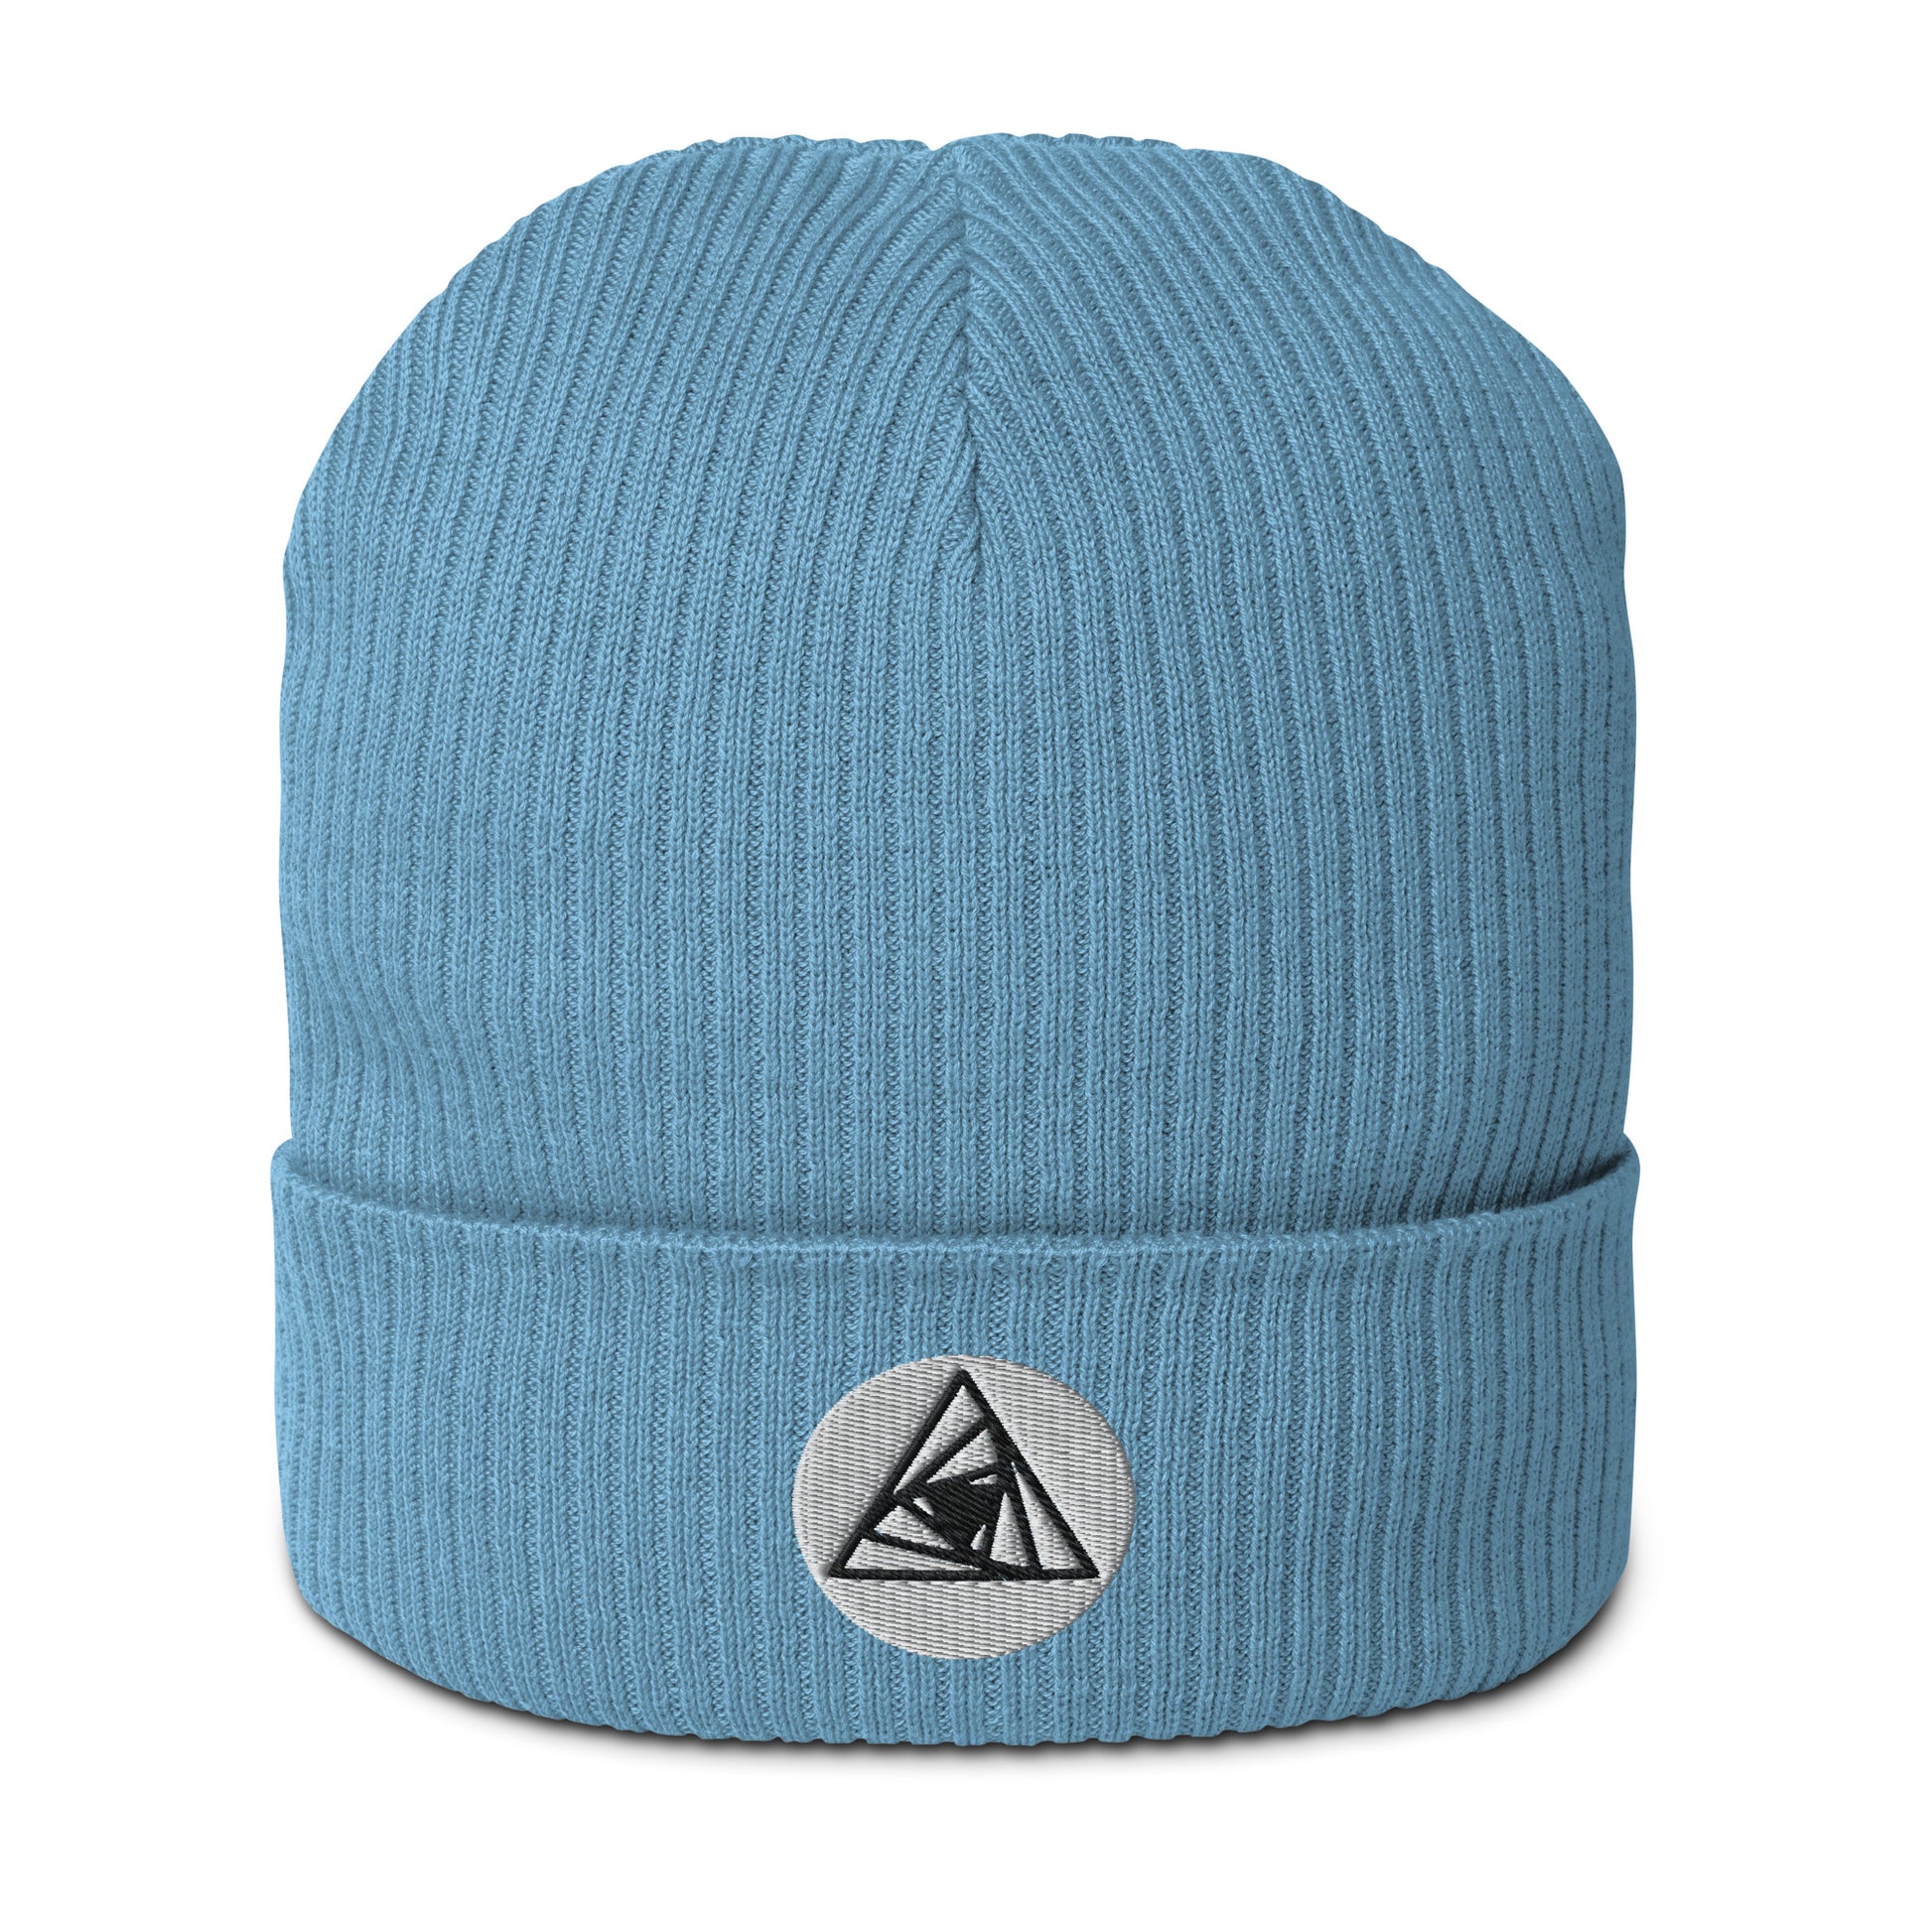 Behold, our Spiraling Equilateral Triangles Beanie in Bermuda Blue  —a garment of cosmic significance. Crafted from organic cotton and adorned with a mesmerizing Spiraling Equilateral Triangles embroidery, it's not your run-of-the-mill hat. 